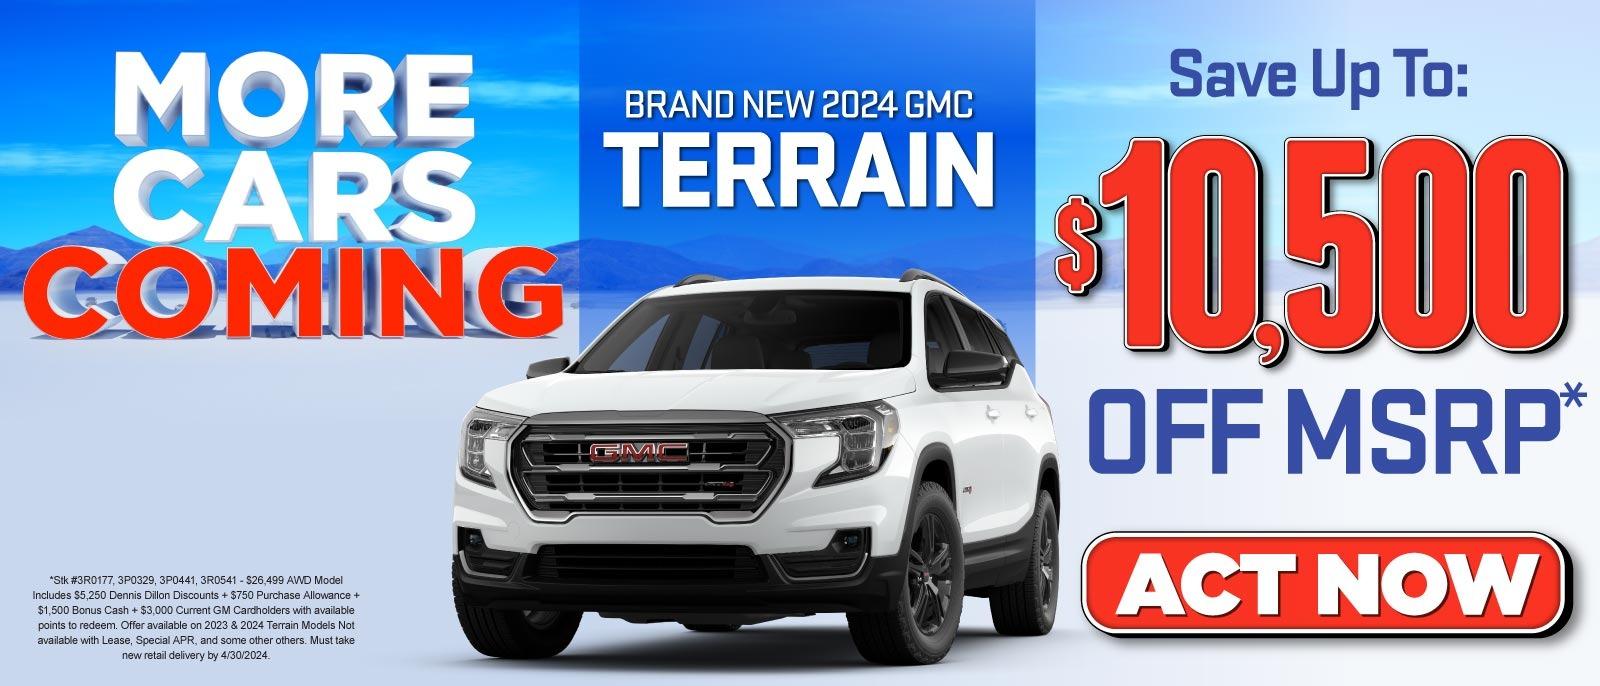 Brand New 2024 GMC Terrain - Save Up To: $10,500 Off MSRP* — Act Now